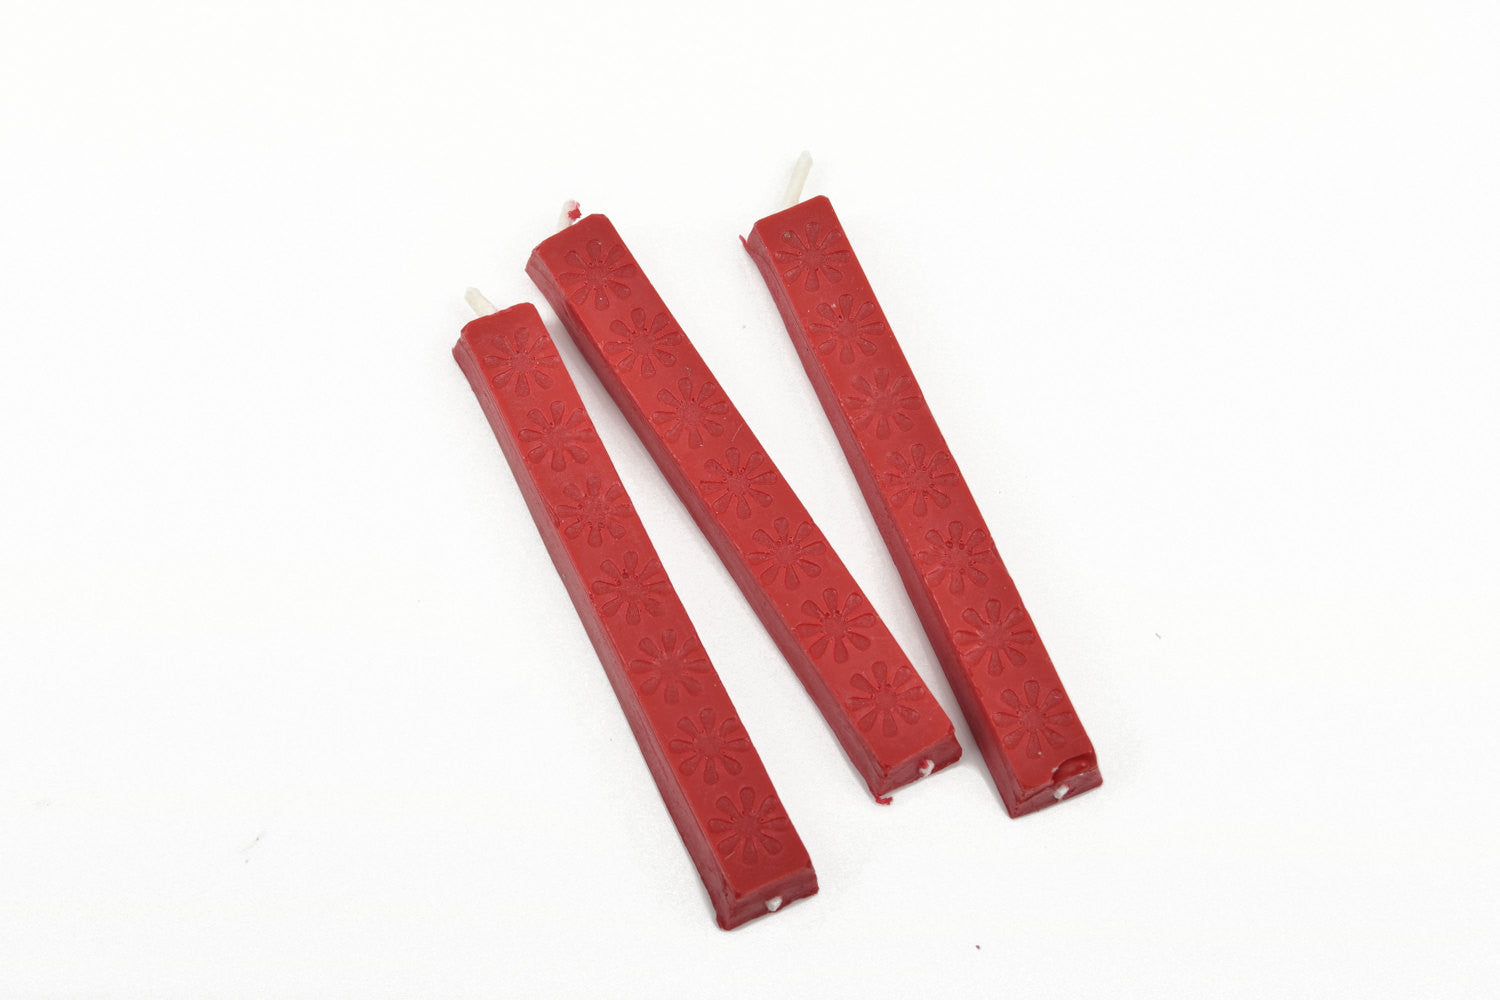 12 Pieces Metalic Red Sealing Wax Sticks With Wicks Vintage Wax Seal Kit  With Wi